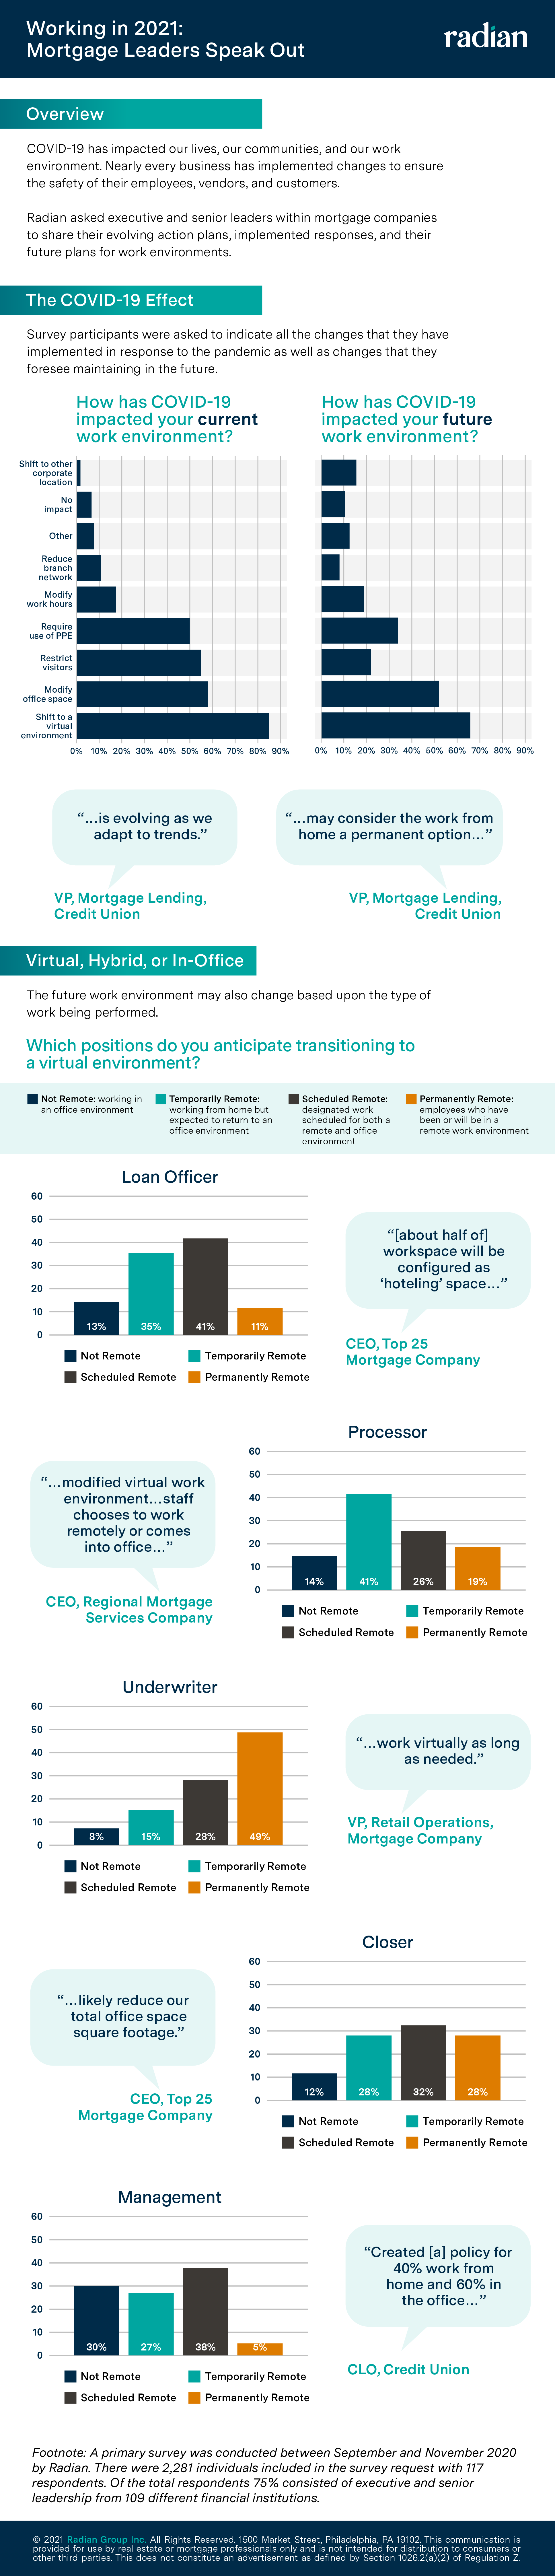 Working in 2021: Mortgage Lenders Speak Out Infographic